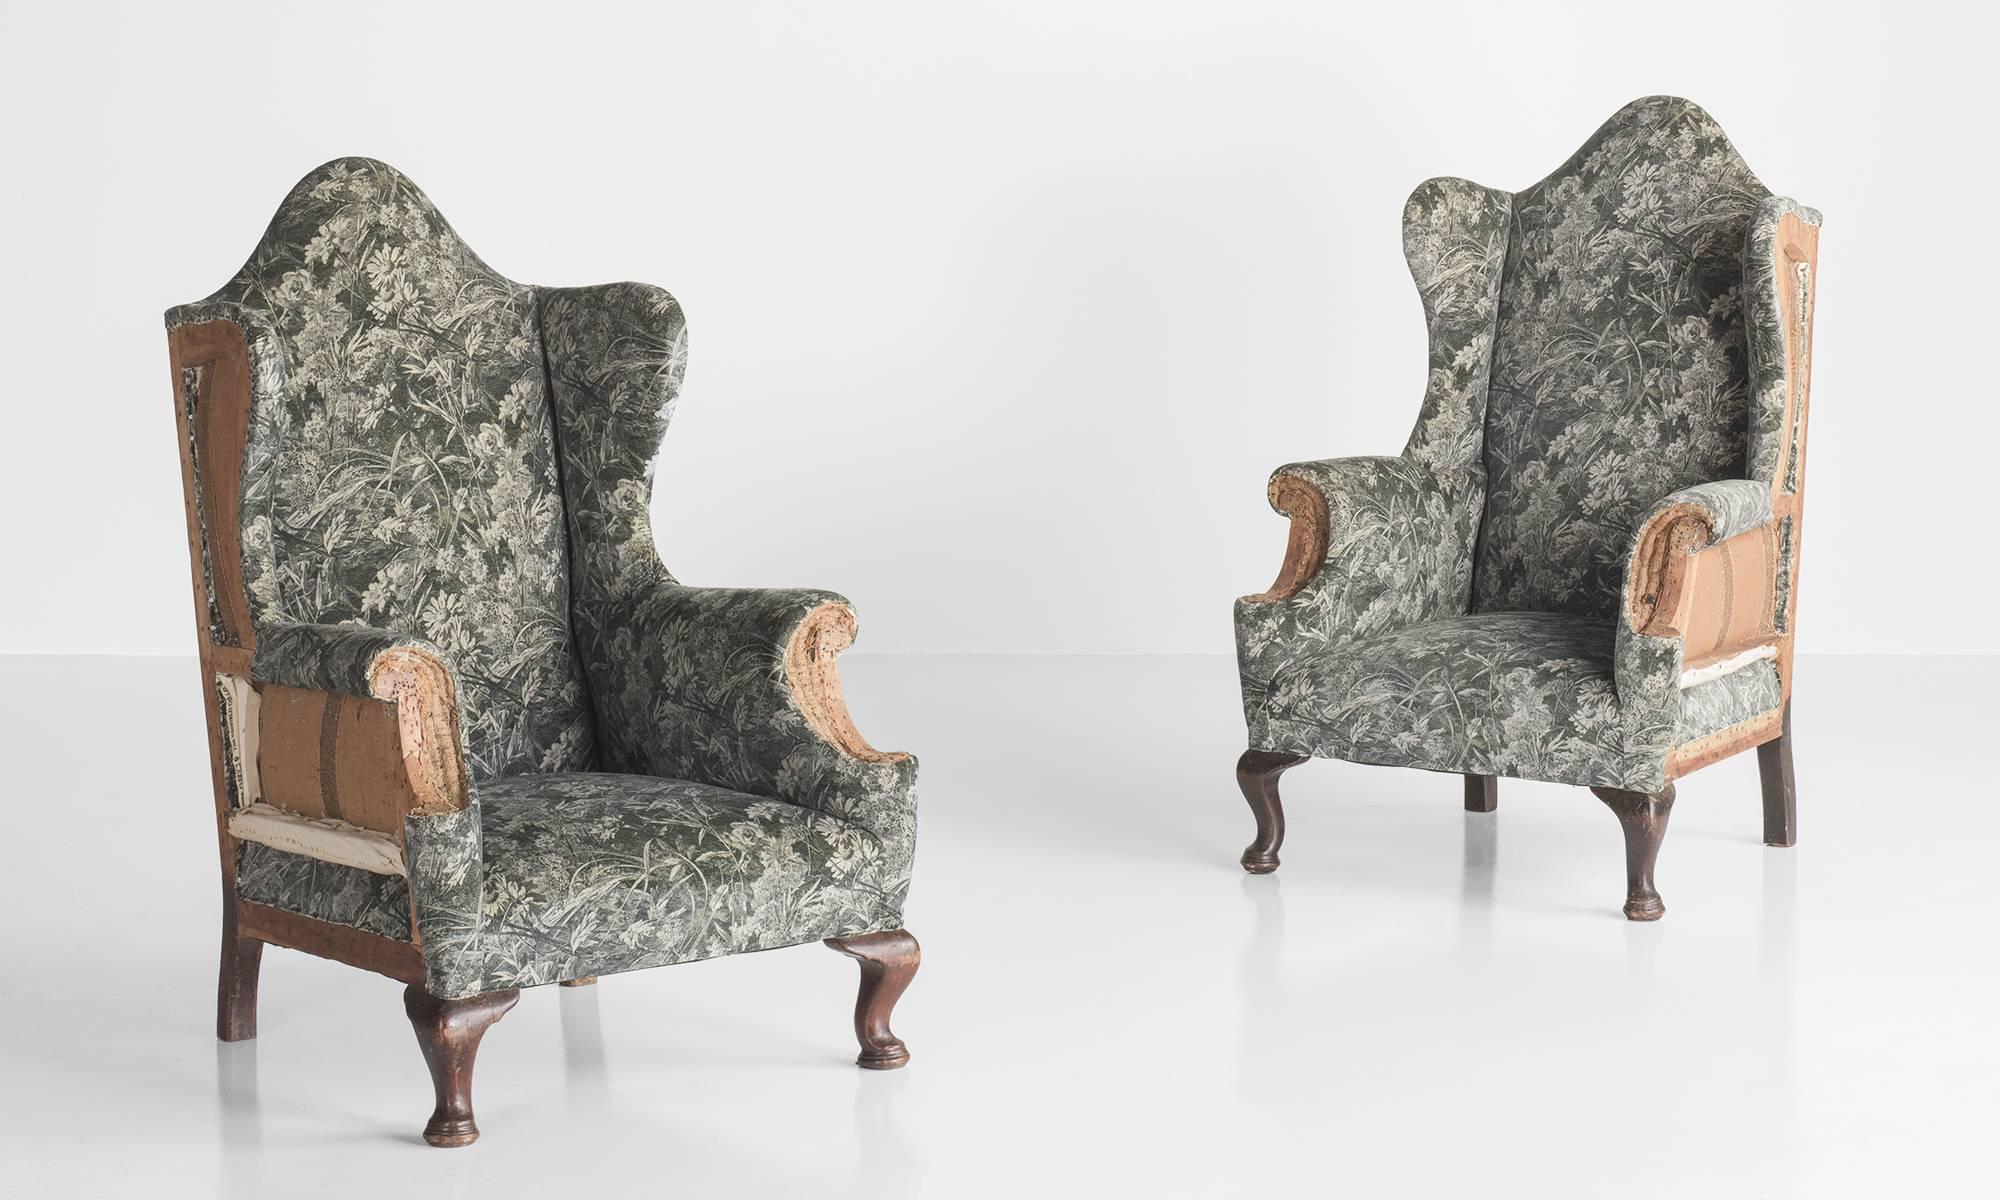 Victorian velvet and wood wingchairs, circa 1890.

Newly reupholstered in Liberty of London velvet fabric with exposed sides and back.